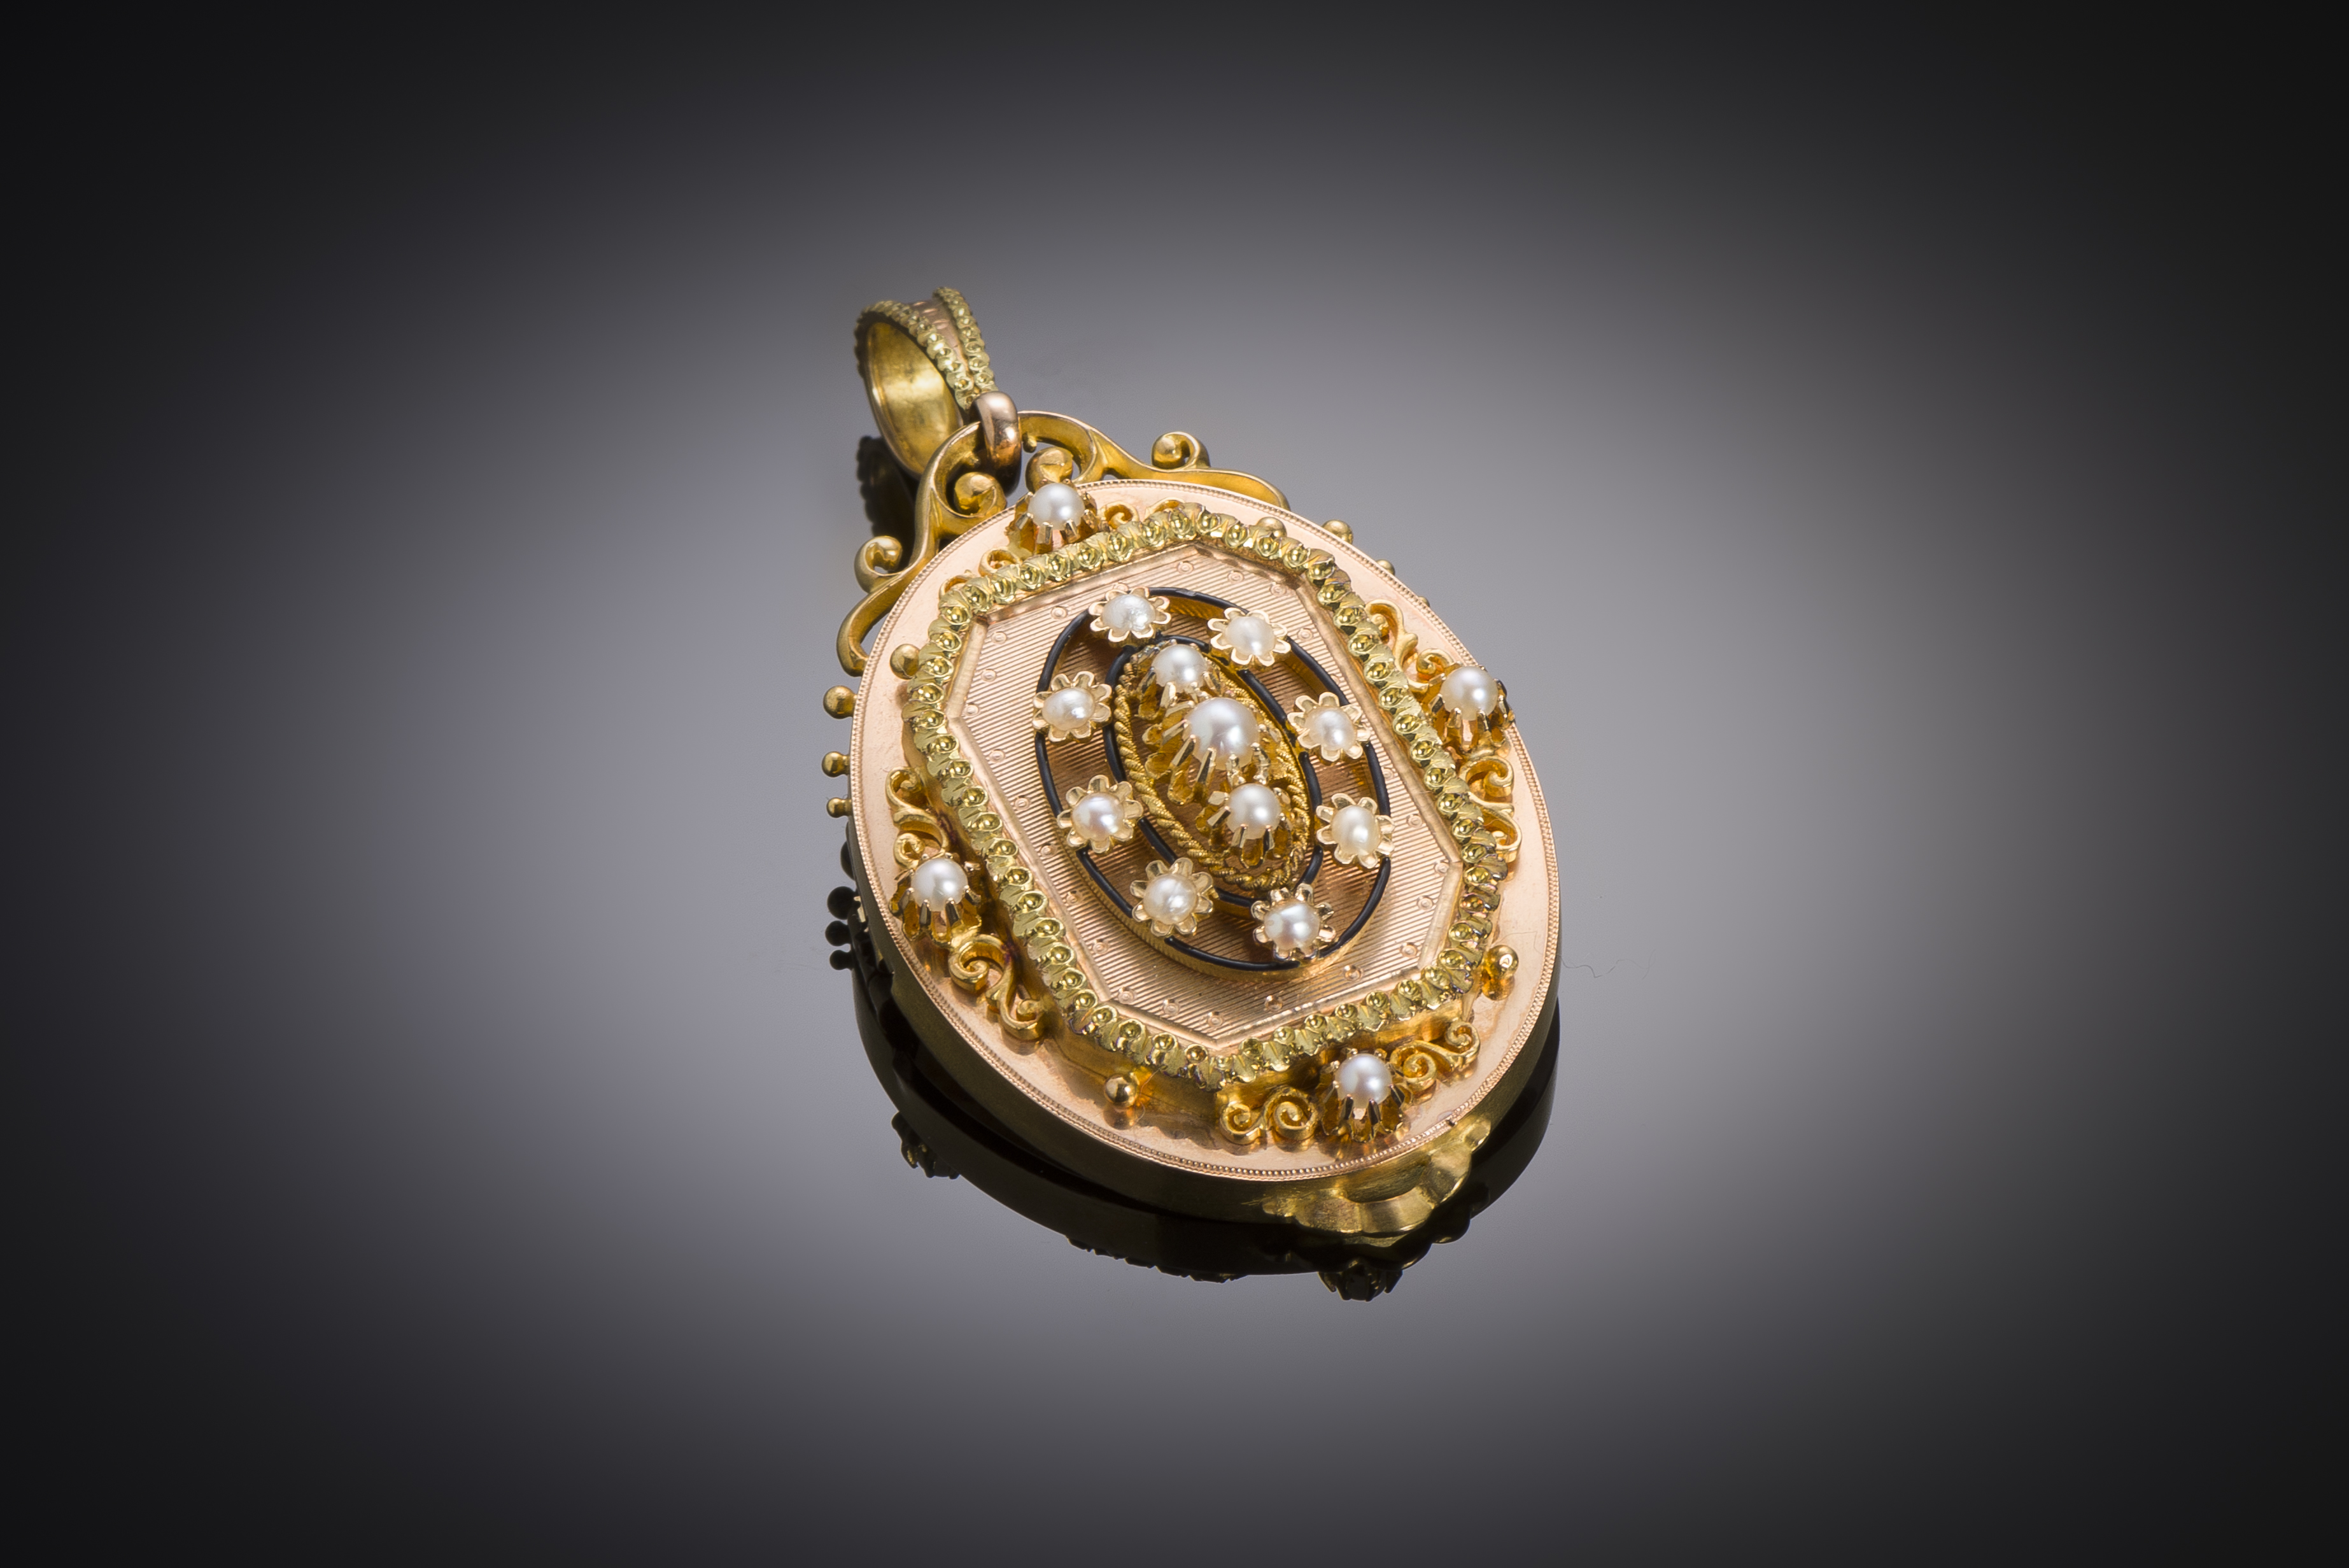 French pendant / brooch pearls Napoleon III period-1